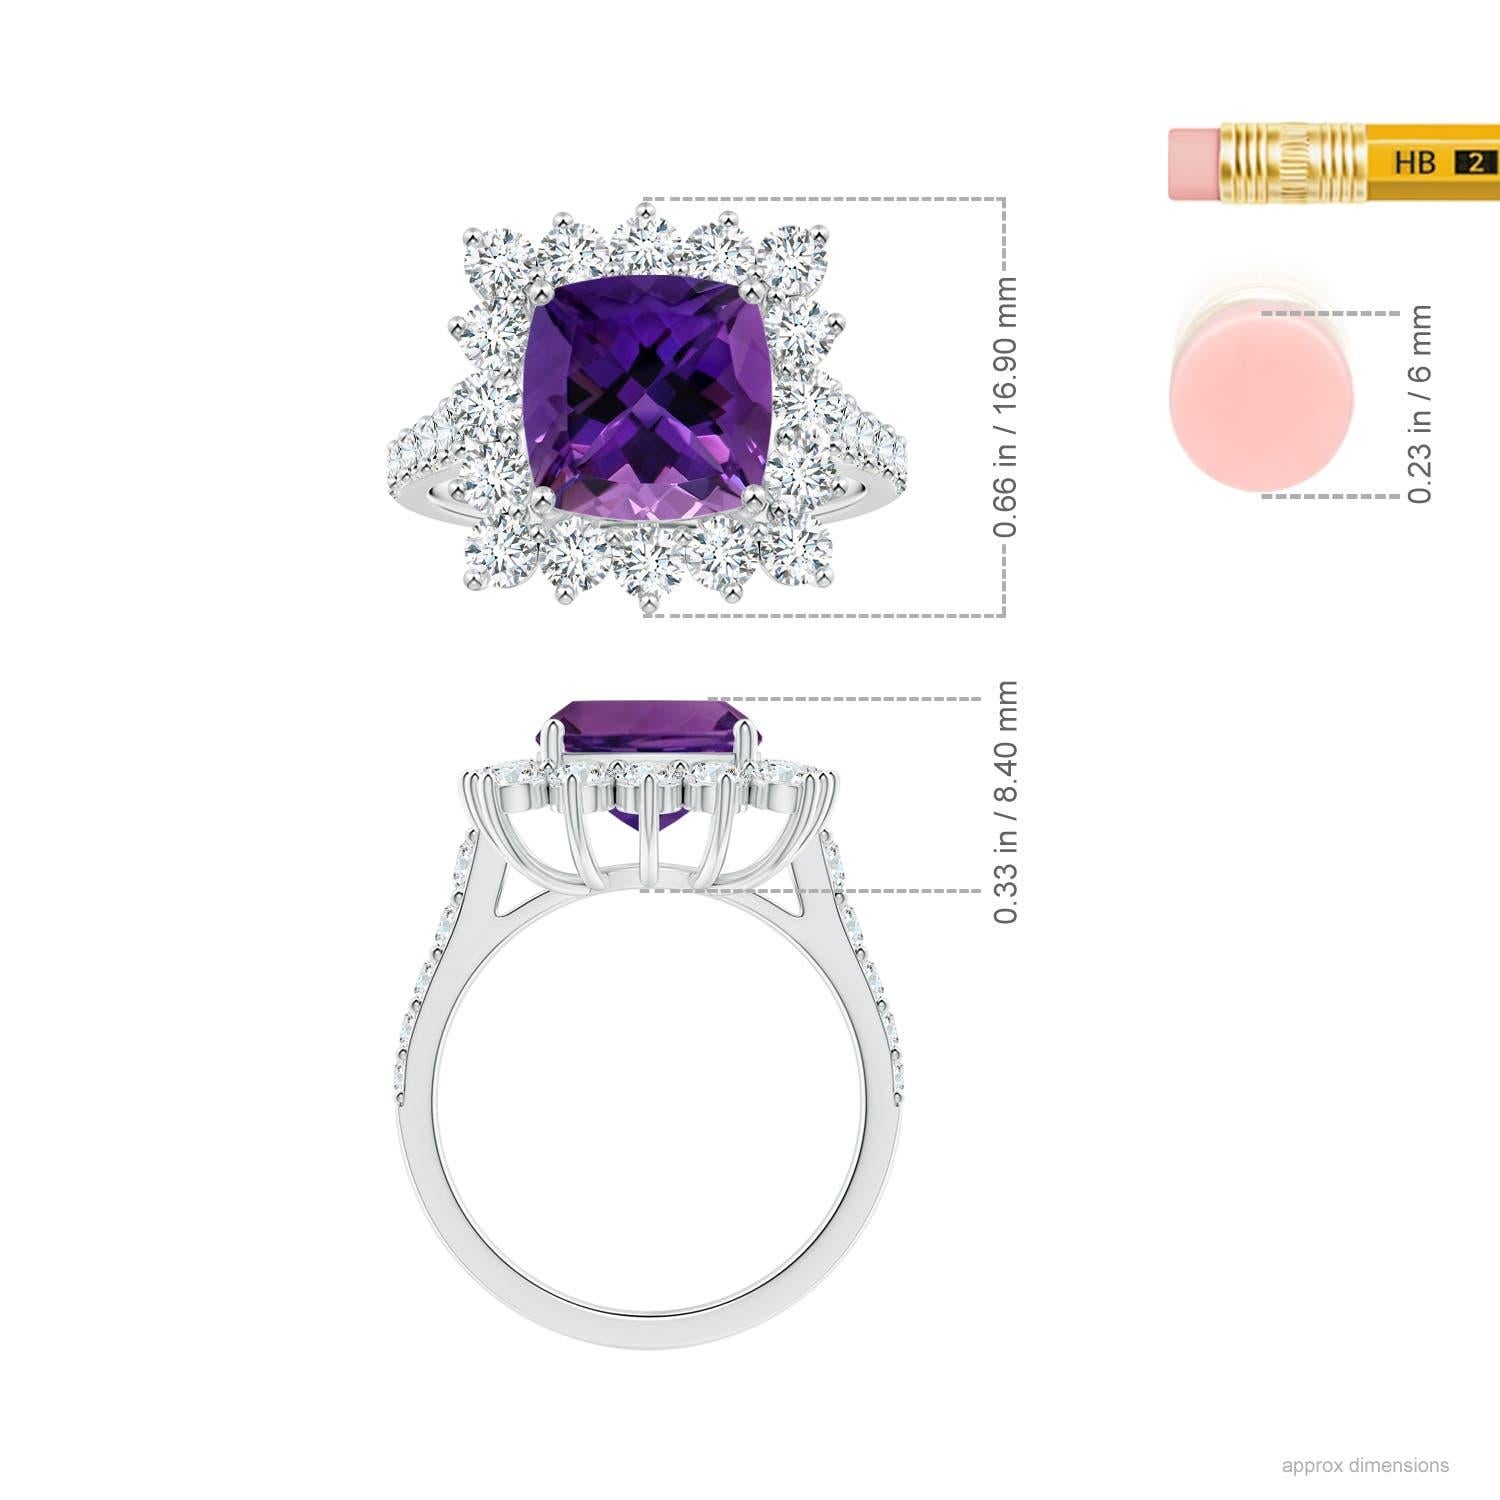 For Sale:  Angara Princess Diana Inspired Gia Certified Cushion Amethyst Ring in White Gold 5